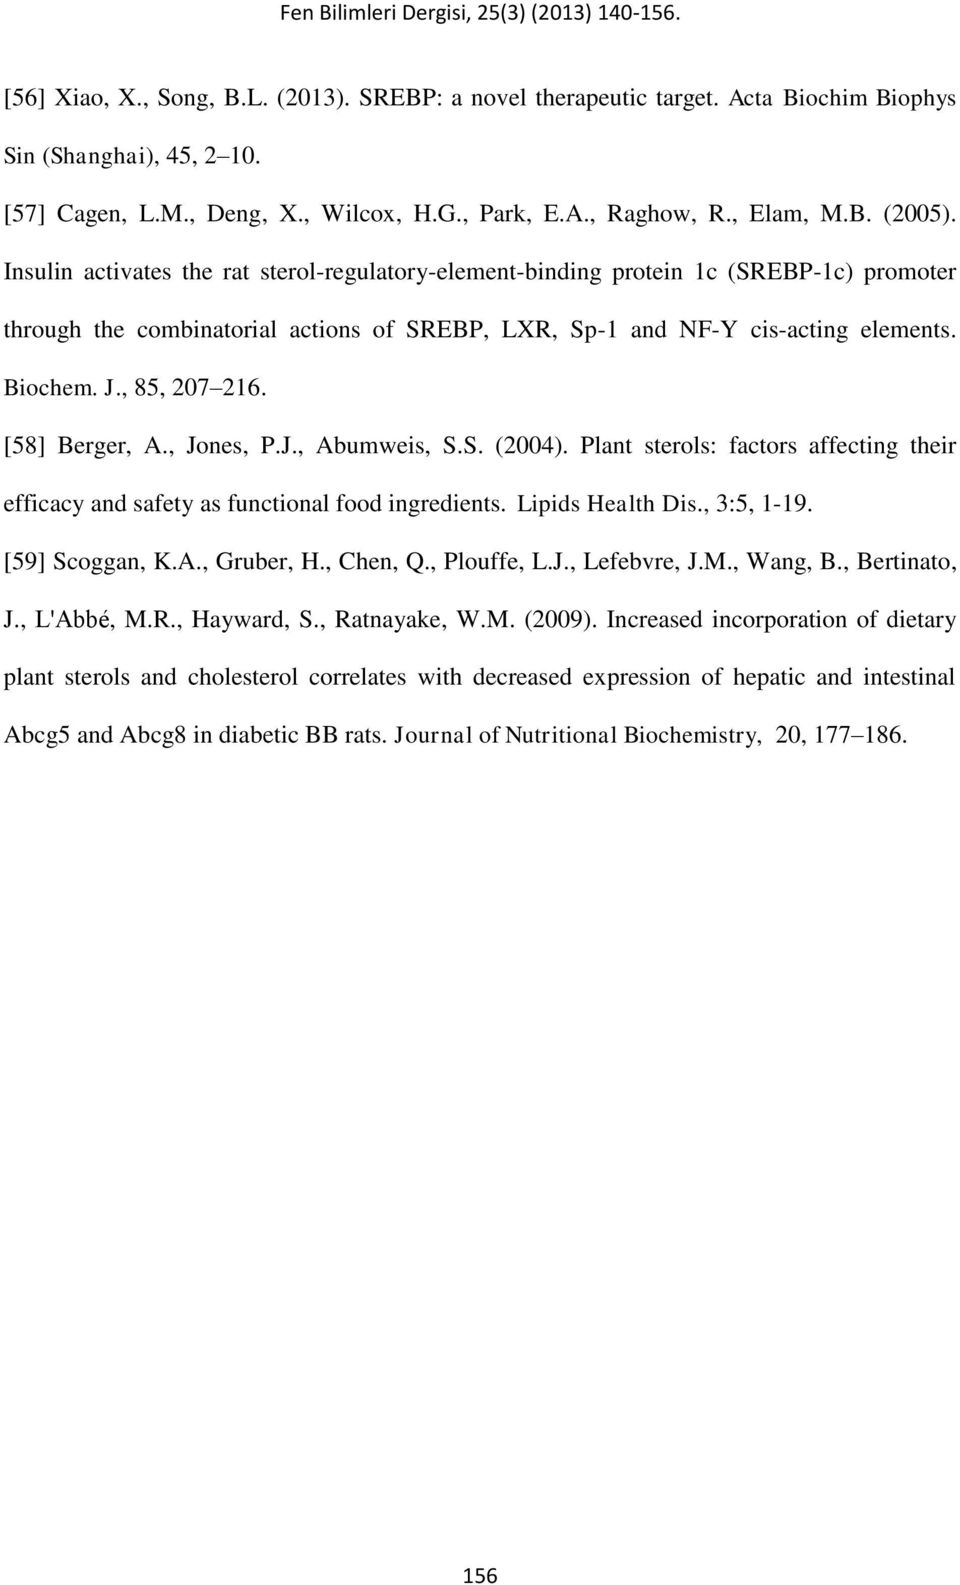 [58] Berger, A., Jones, P.J., Abumweis, S.S. (2004). Plant sterols: factors affecting their efficacy and safety as functional food ingredients. Lipids Health Dis., 3:5, 1-19. [59] Scoggan, K.A., Gruber, H.